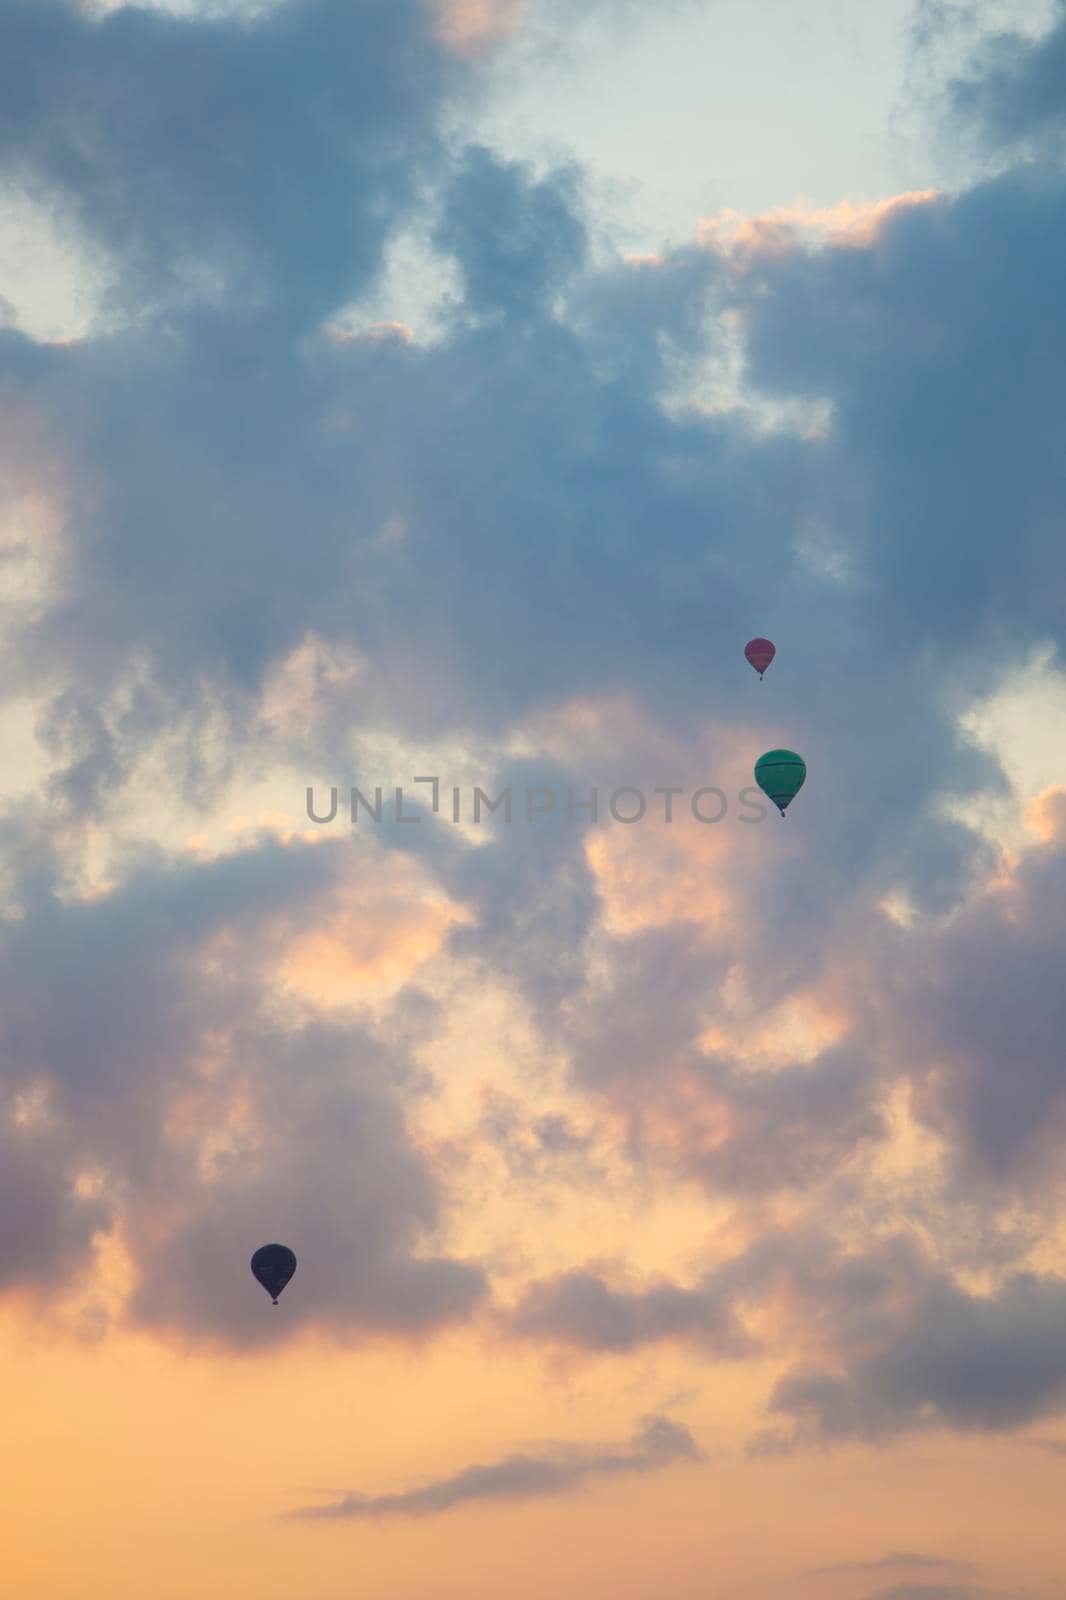 three hot air balloons in colorful sky with clouds by ahavelaar